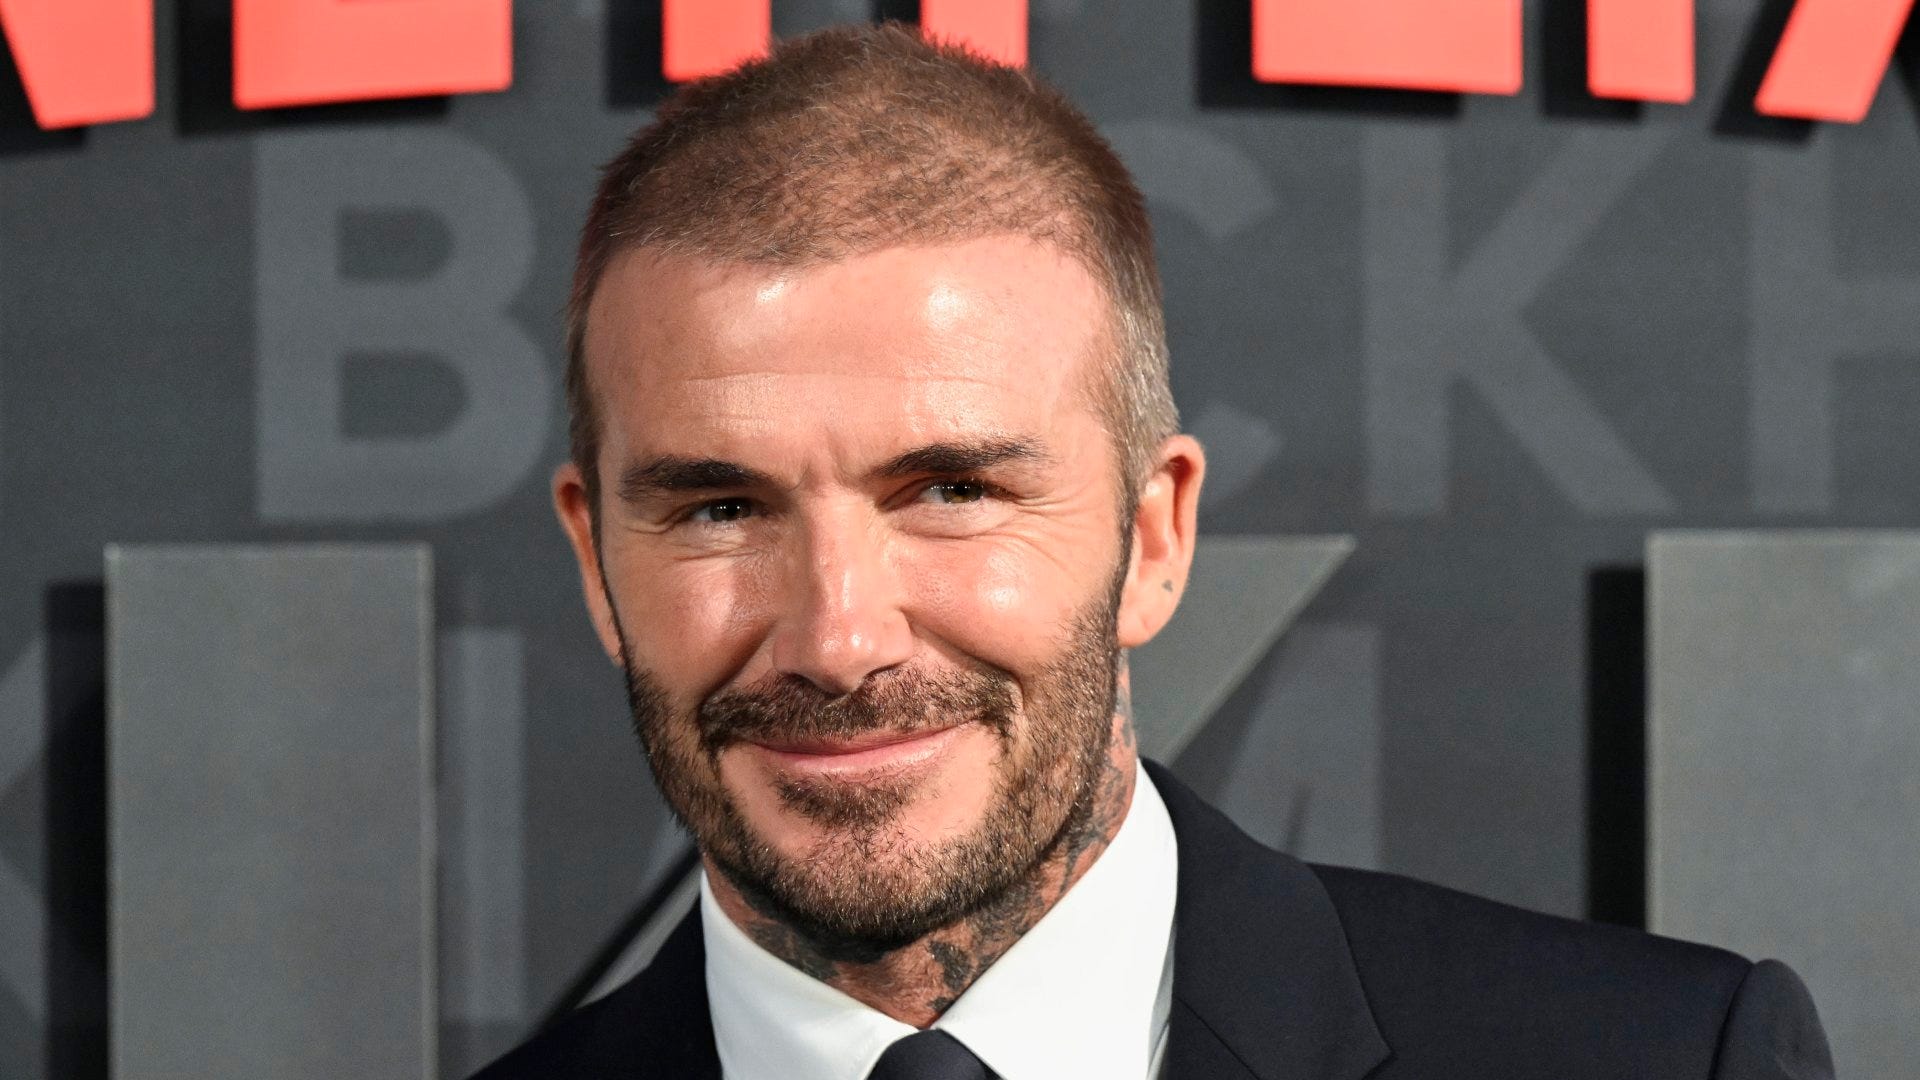 The boy from east London!' - Football icon & Inter Miami co-owner David  Beckham visits Harvard University Business School students to talk MLS &  Lionel Messi